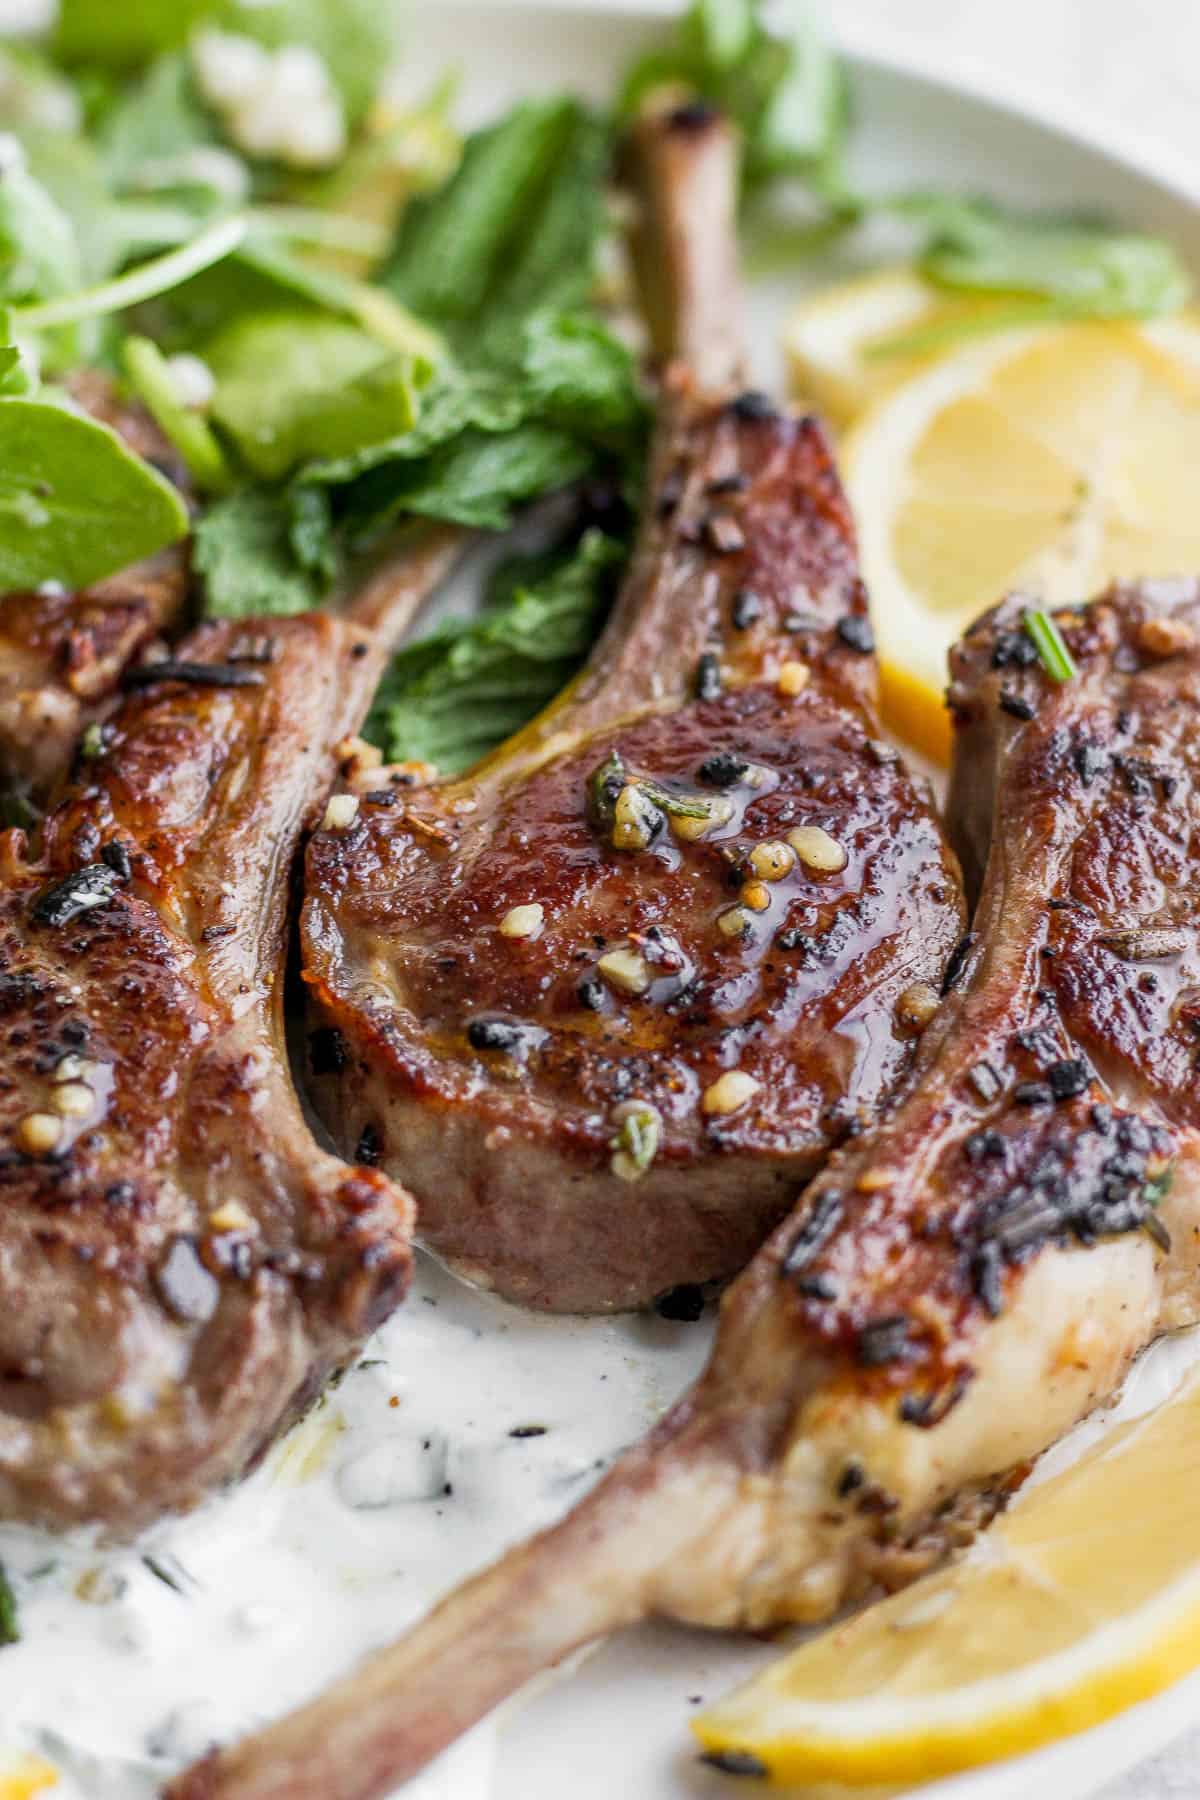 Seared lamb chops on a white plate.